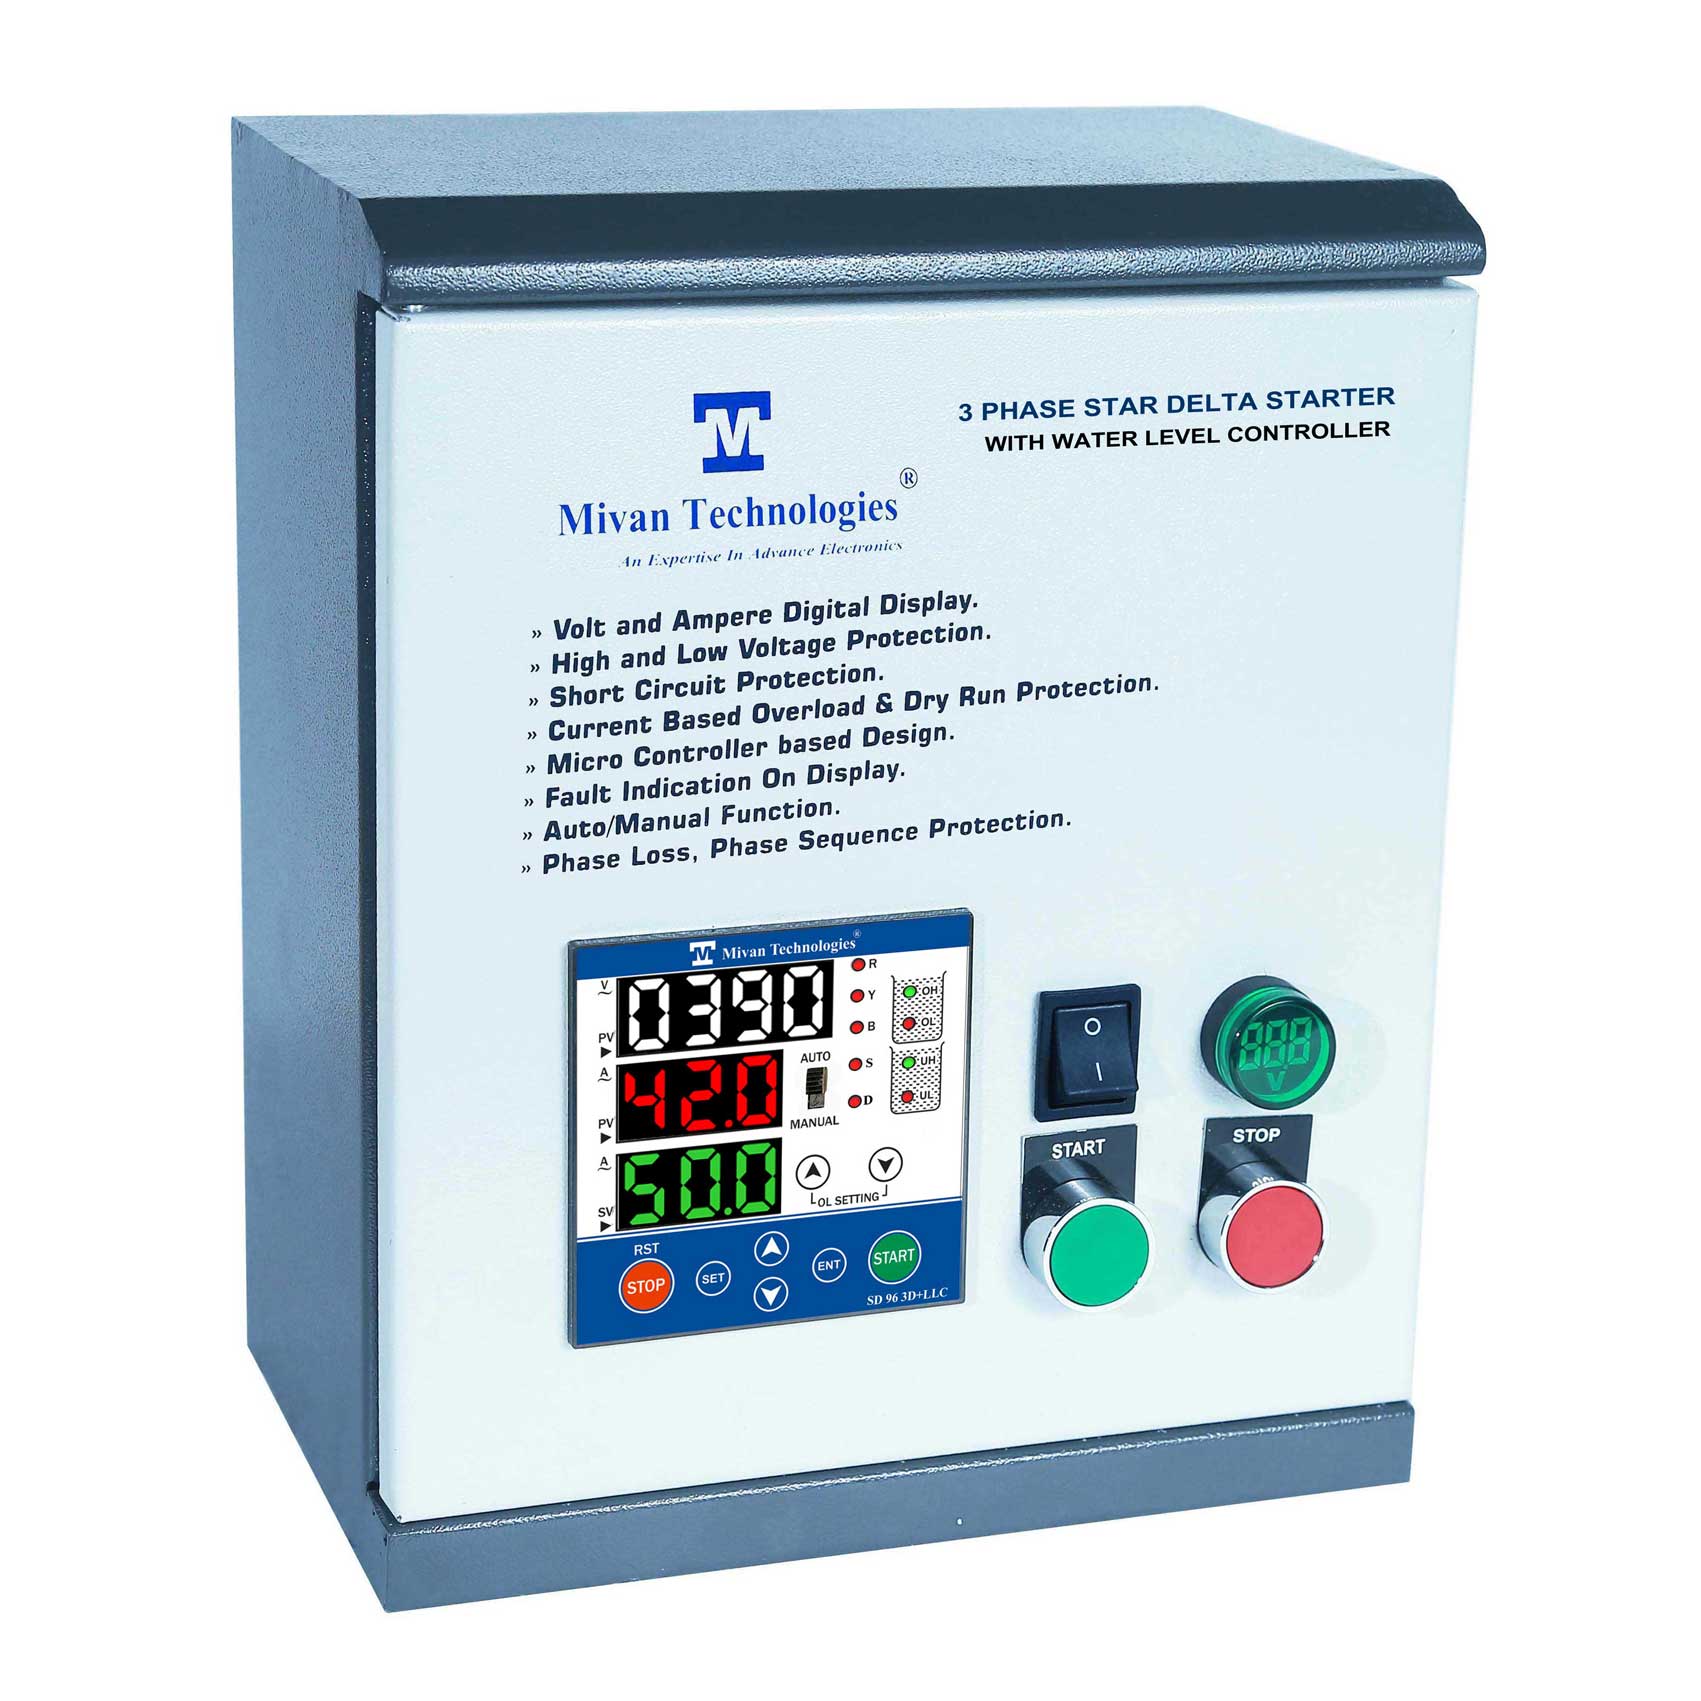 3 phase 3 display Heavy Duty water level controller with Star Delta motor starter with HV LV OL Dry protection with Auto switch spp and timer SD656550 for 30 HP motor